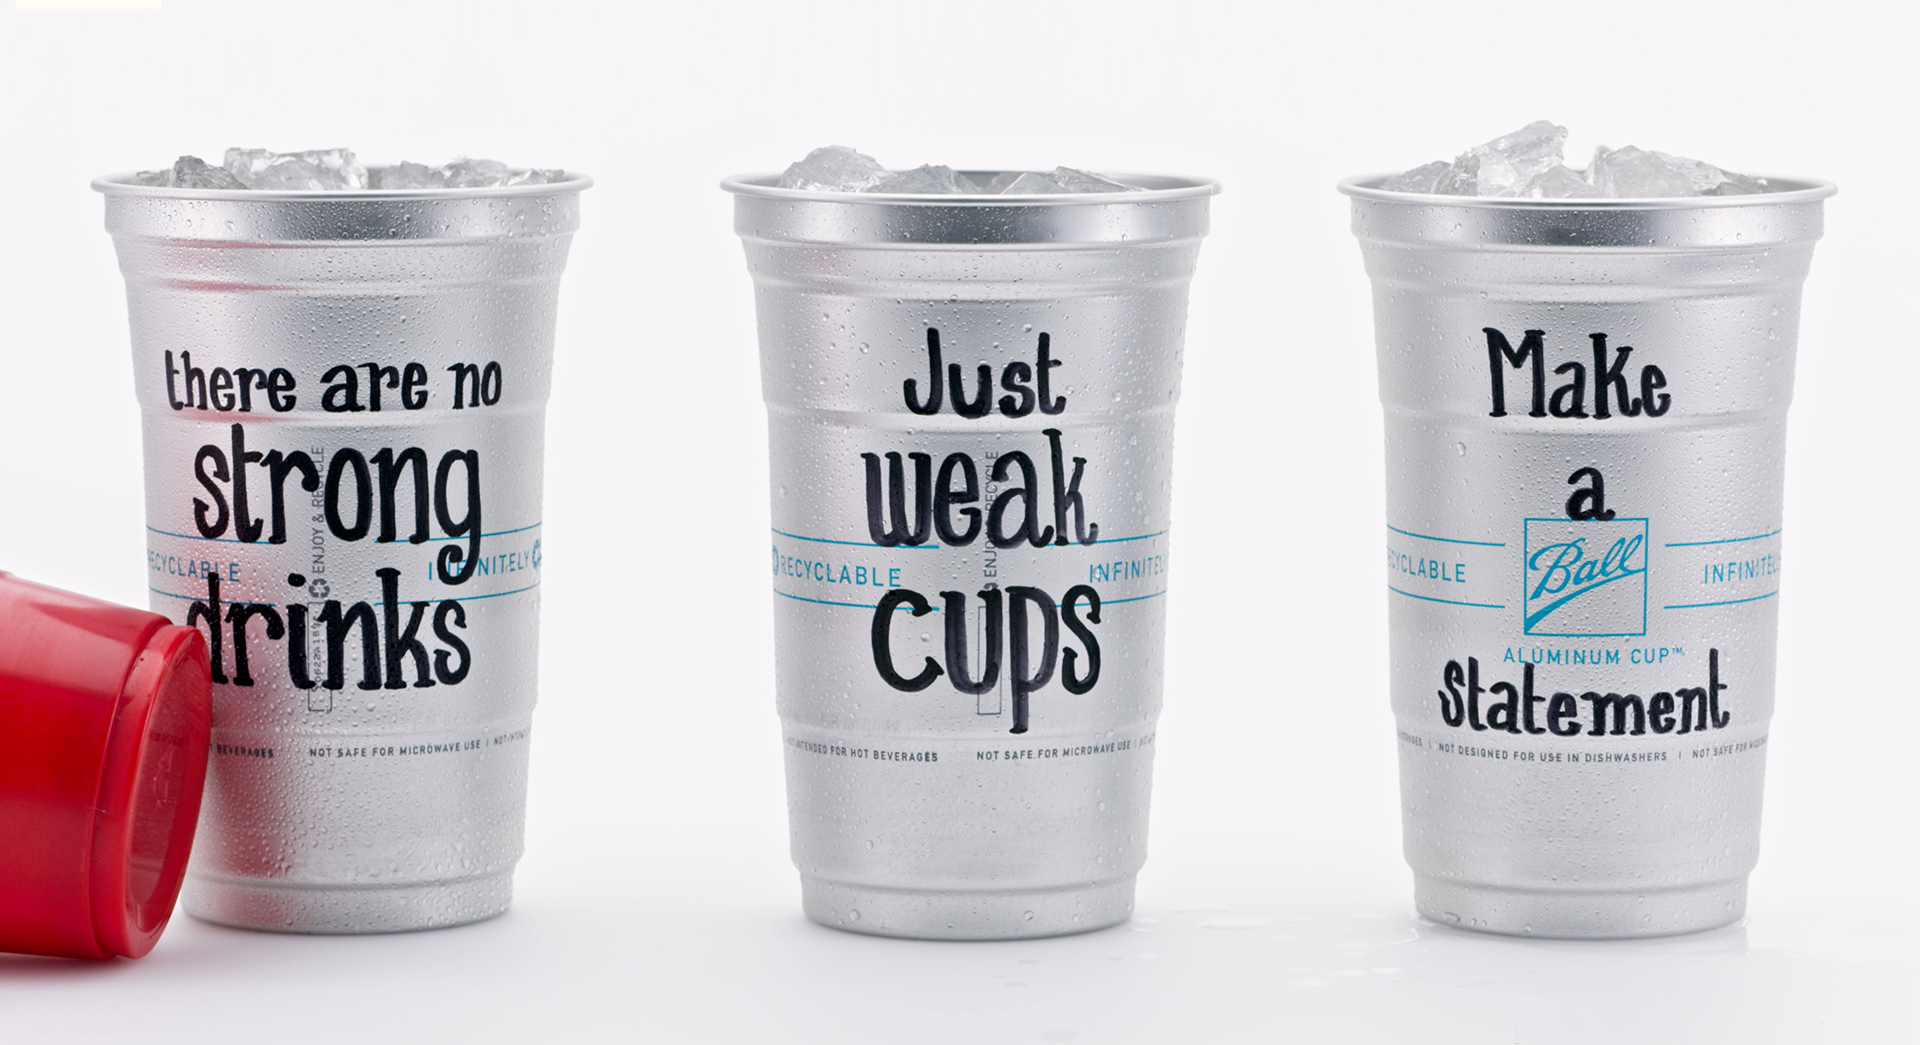 Ball Aluminum Cup recognized in Fast Company's 2020 World Changing Ideas  Awards - Plastic Waste Free World